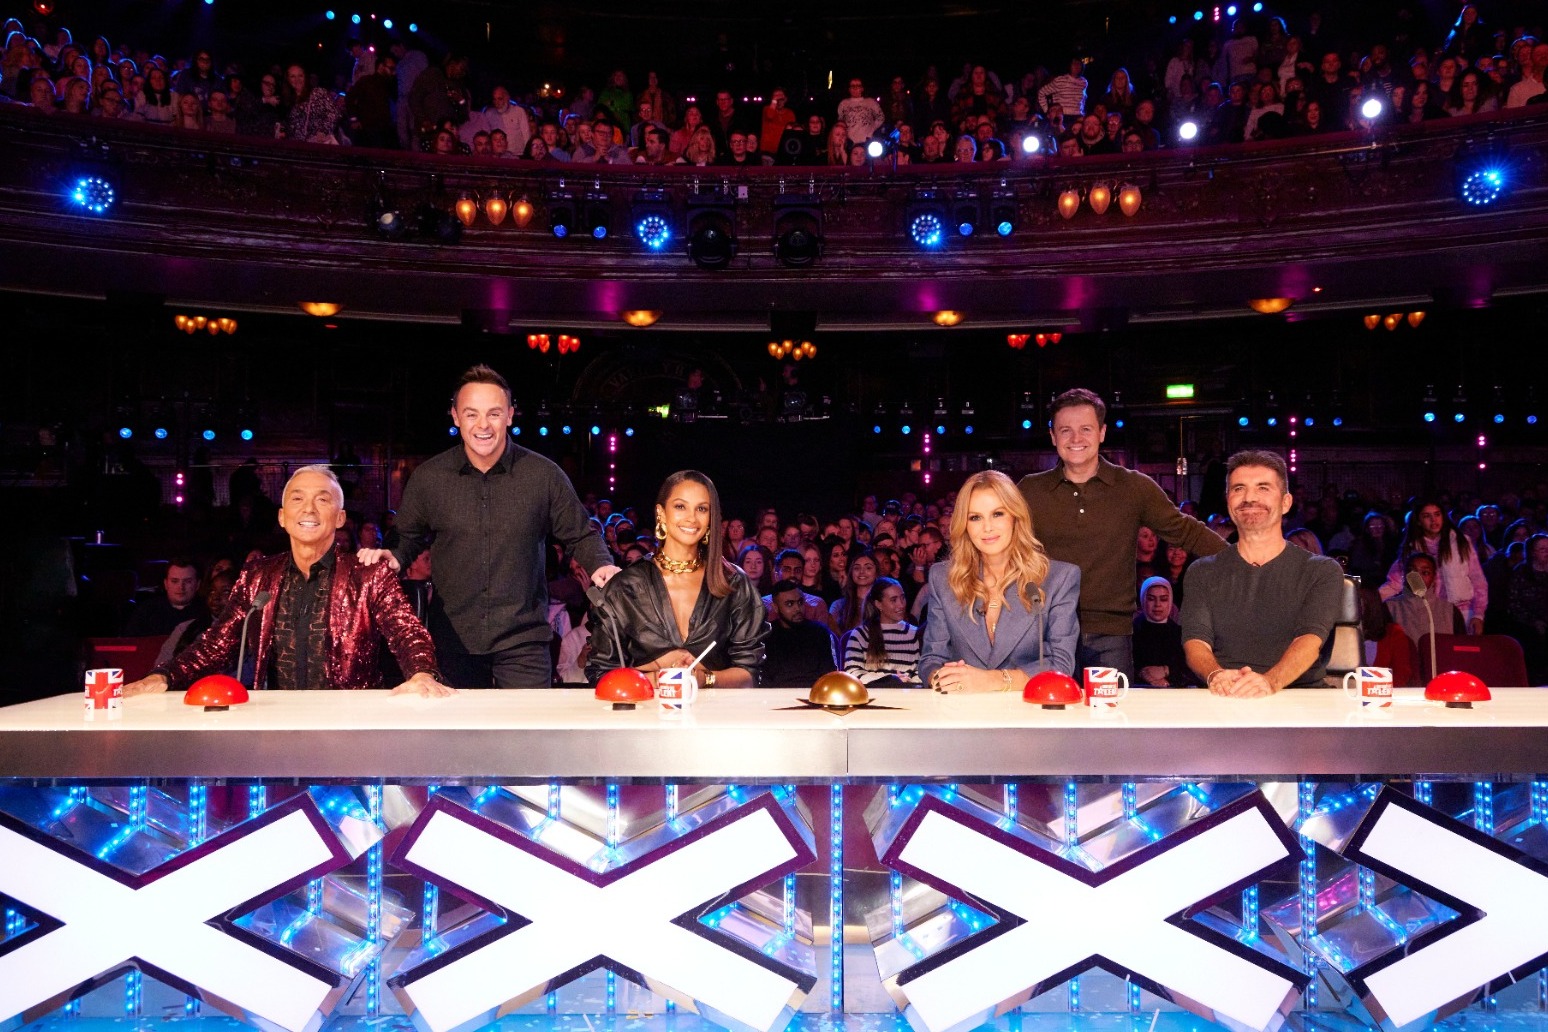 Britain’s Got Talent premiere sees fall in viewer numbers from last year 